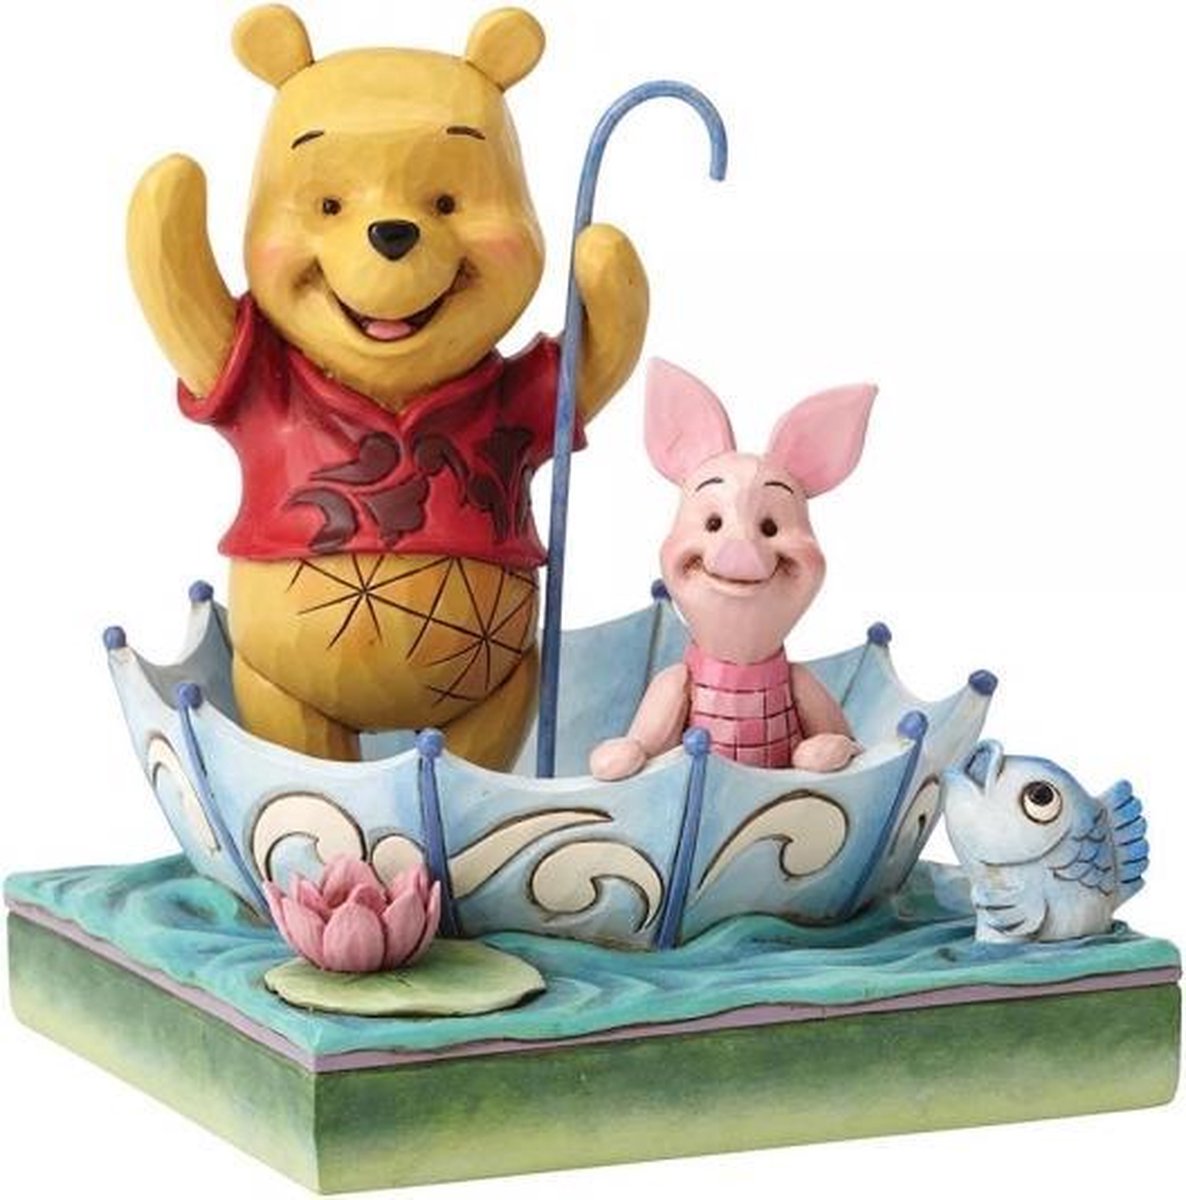 50 Years of Friendship - Pooh and Piglet - Disney Traditions